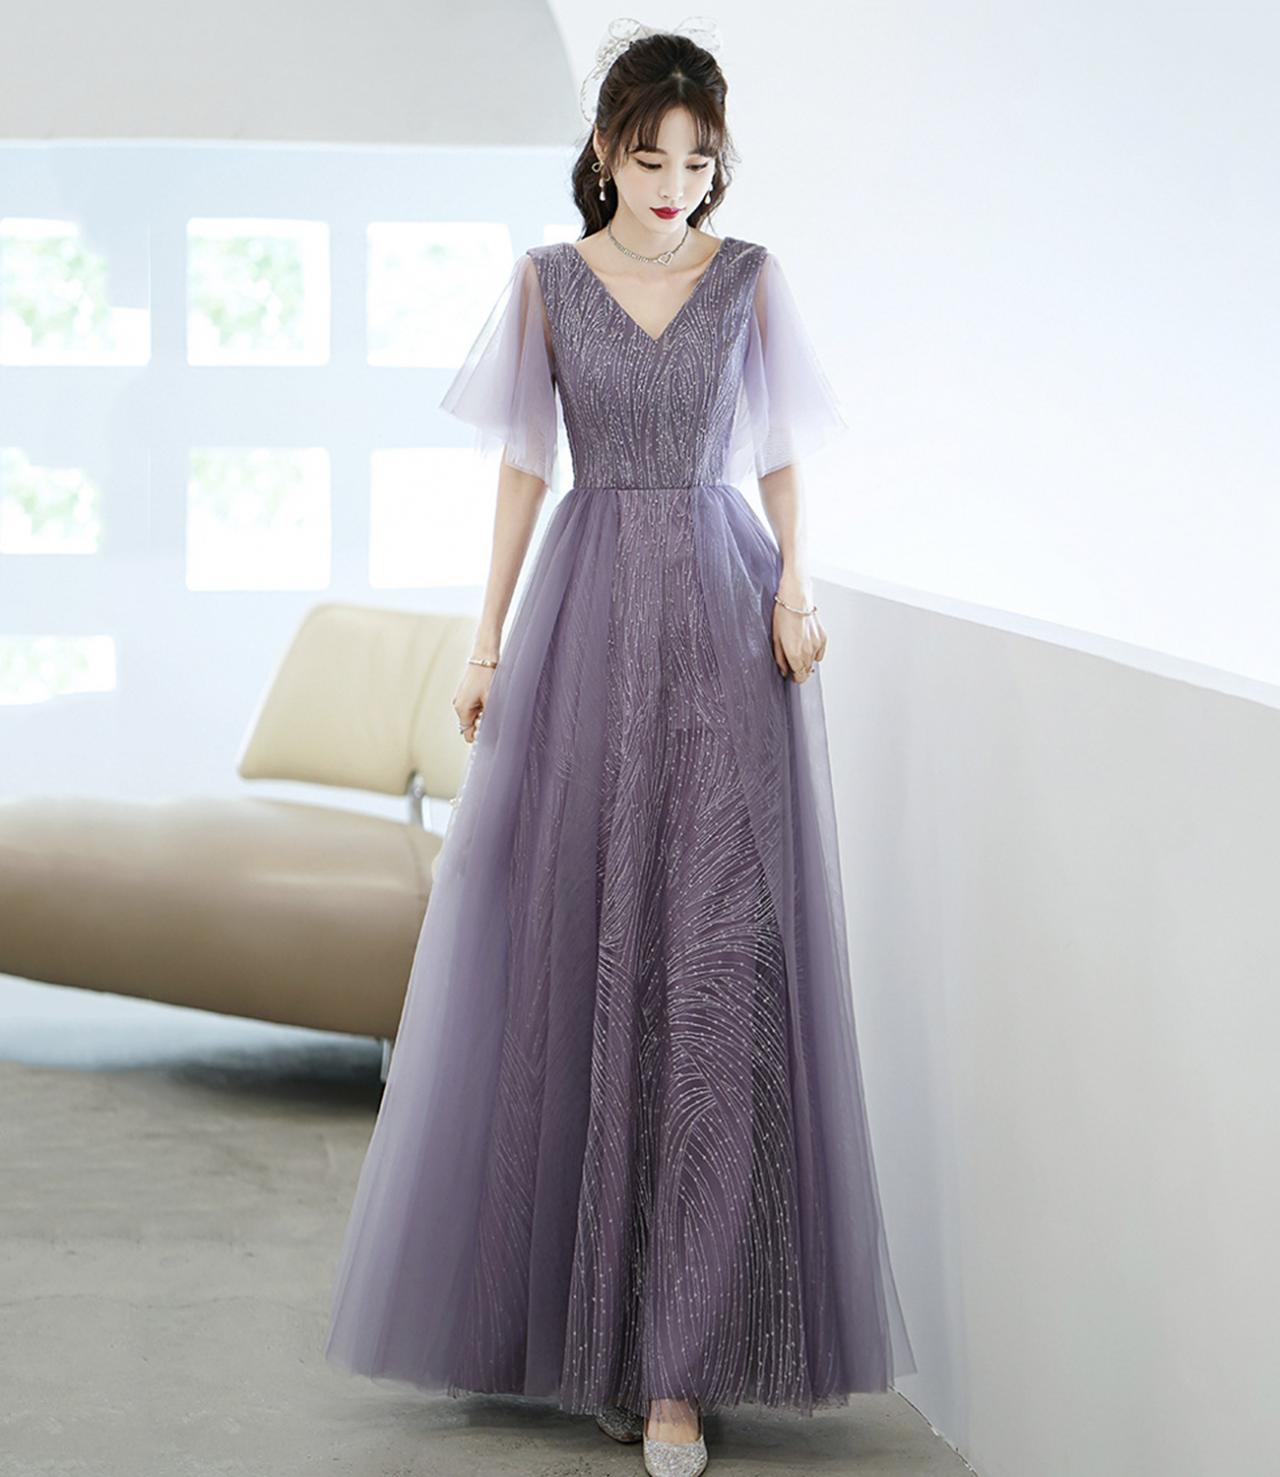 Purple Tulle Beads Long Prom Dress A Line Evening Gown